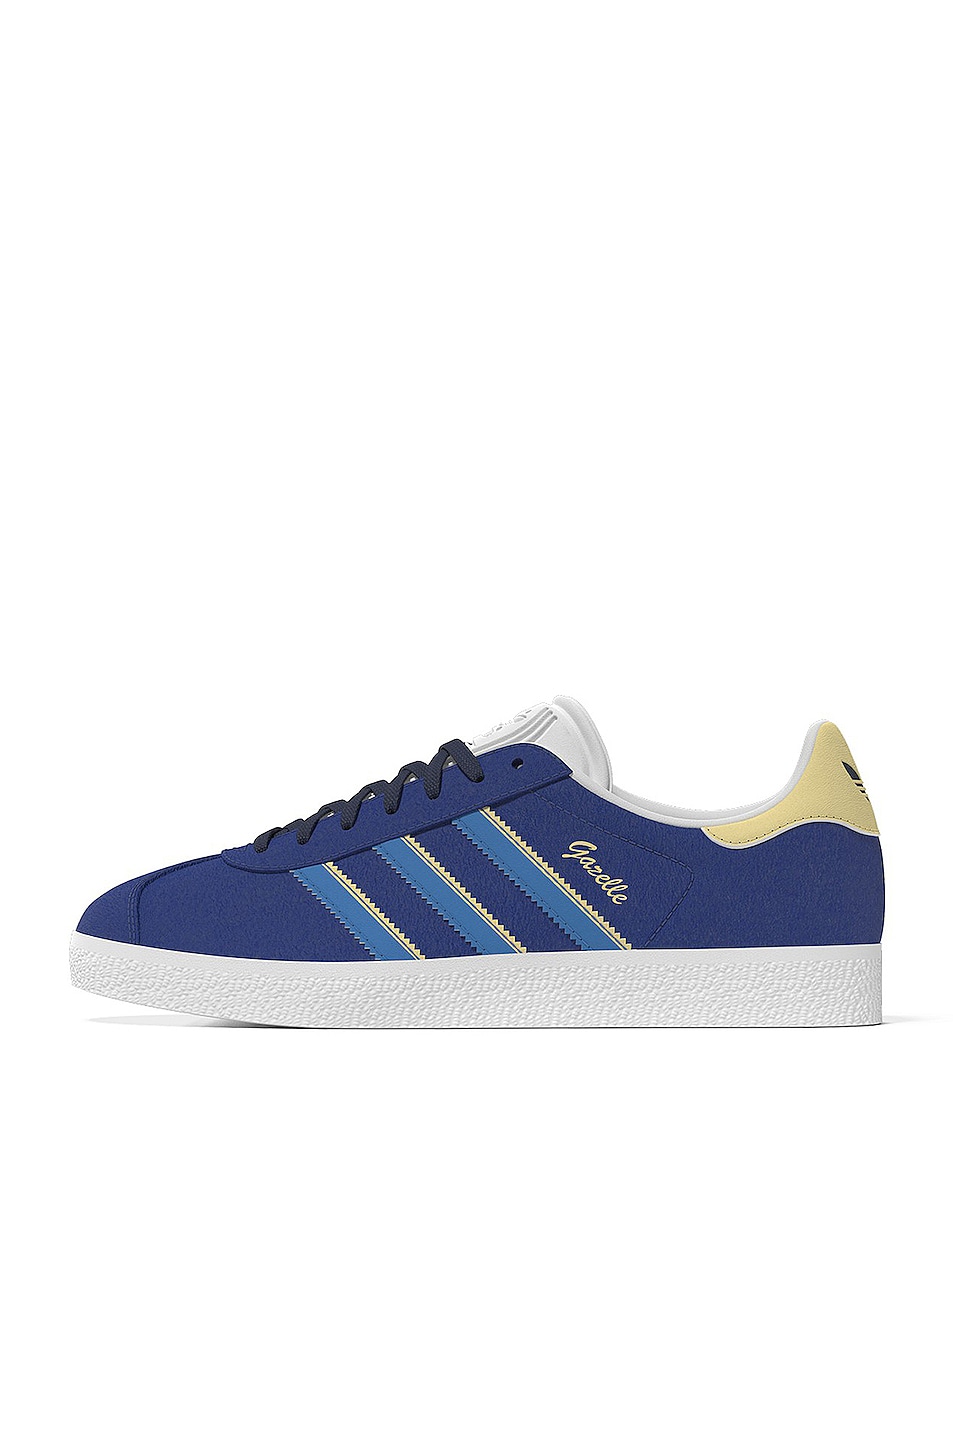 Image 1 of adidas Originals Gazelle in Team Royal Blue, Bright Blue, & Almost Yellow